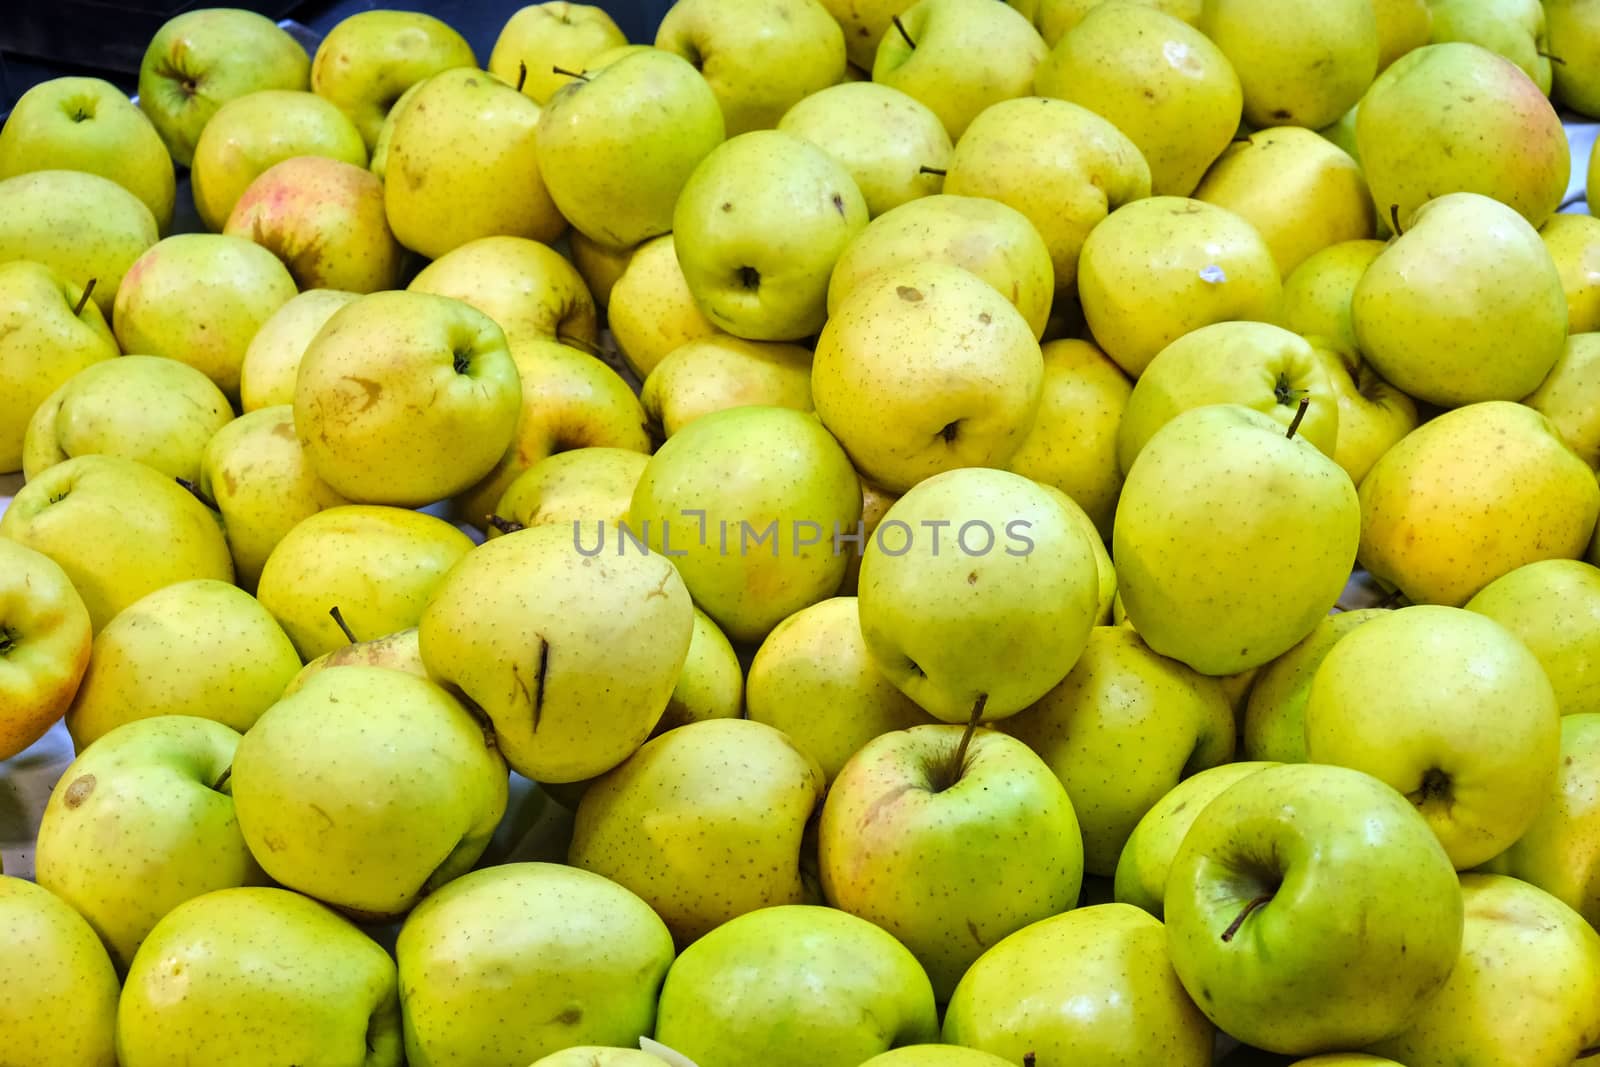 Green apples for sale at a market